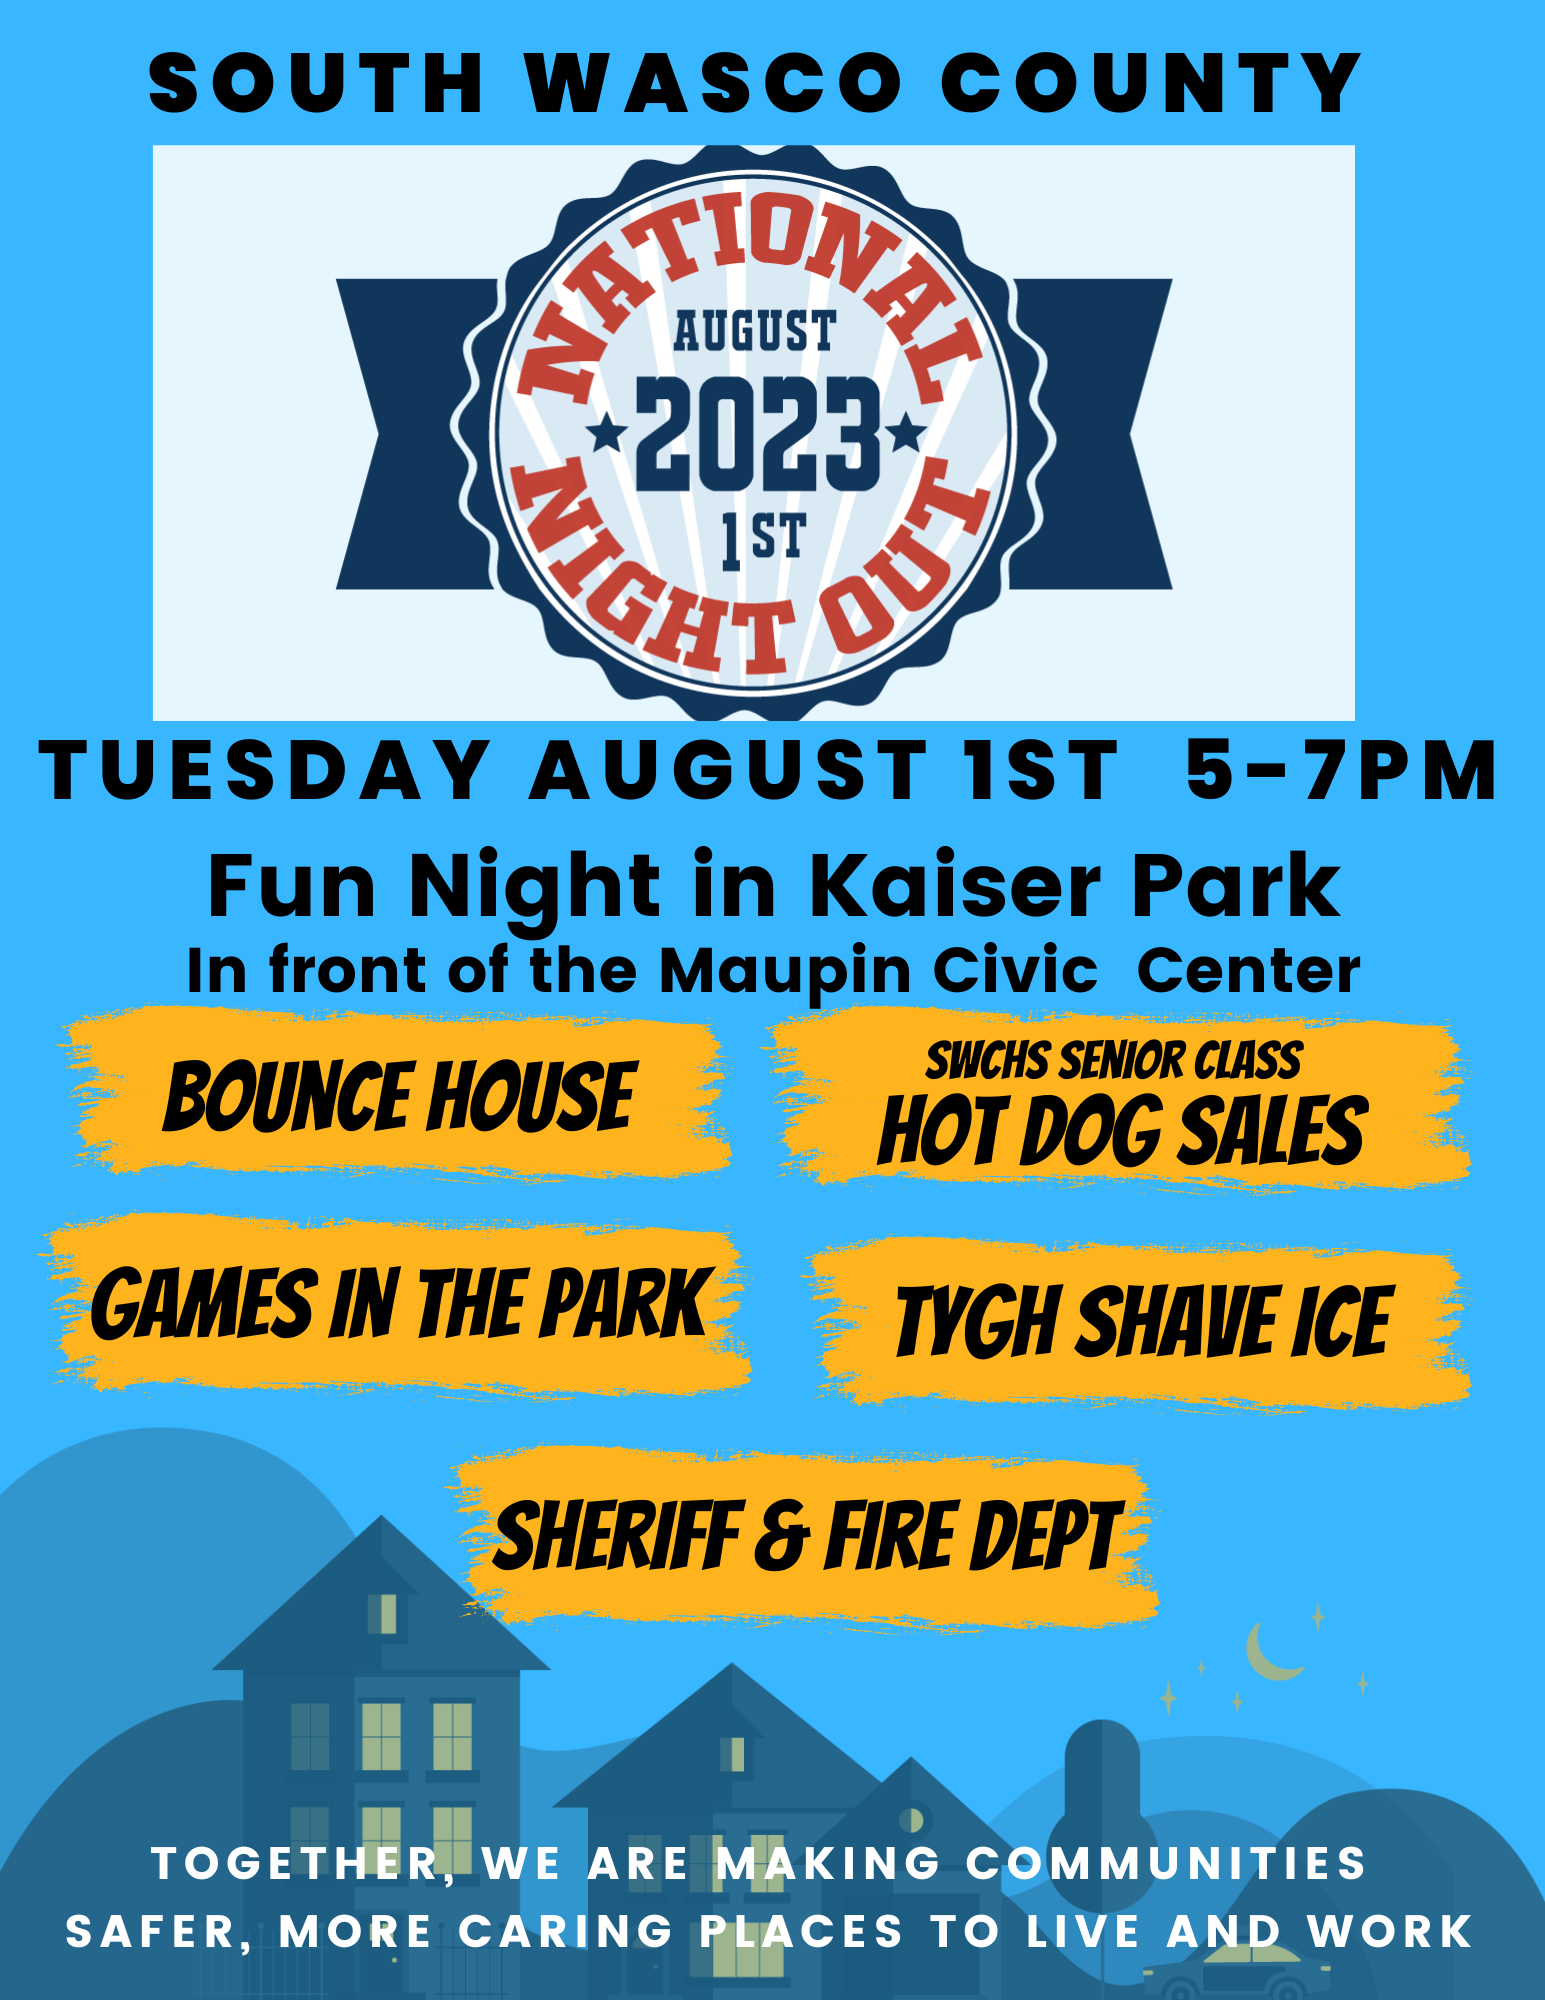 National Night Out - Family Night in Kaiser Park